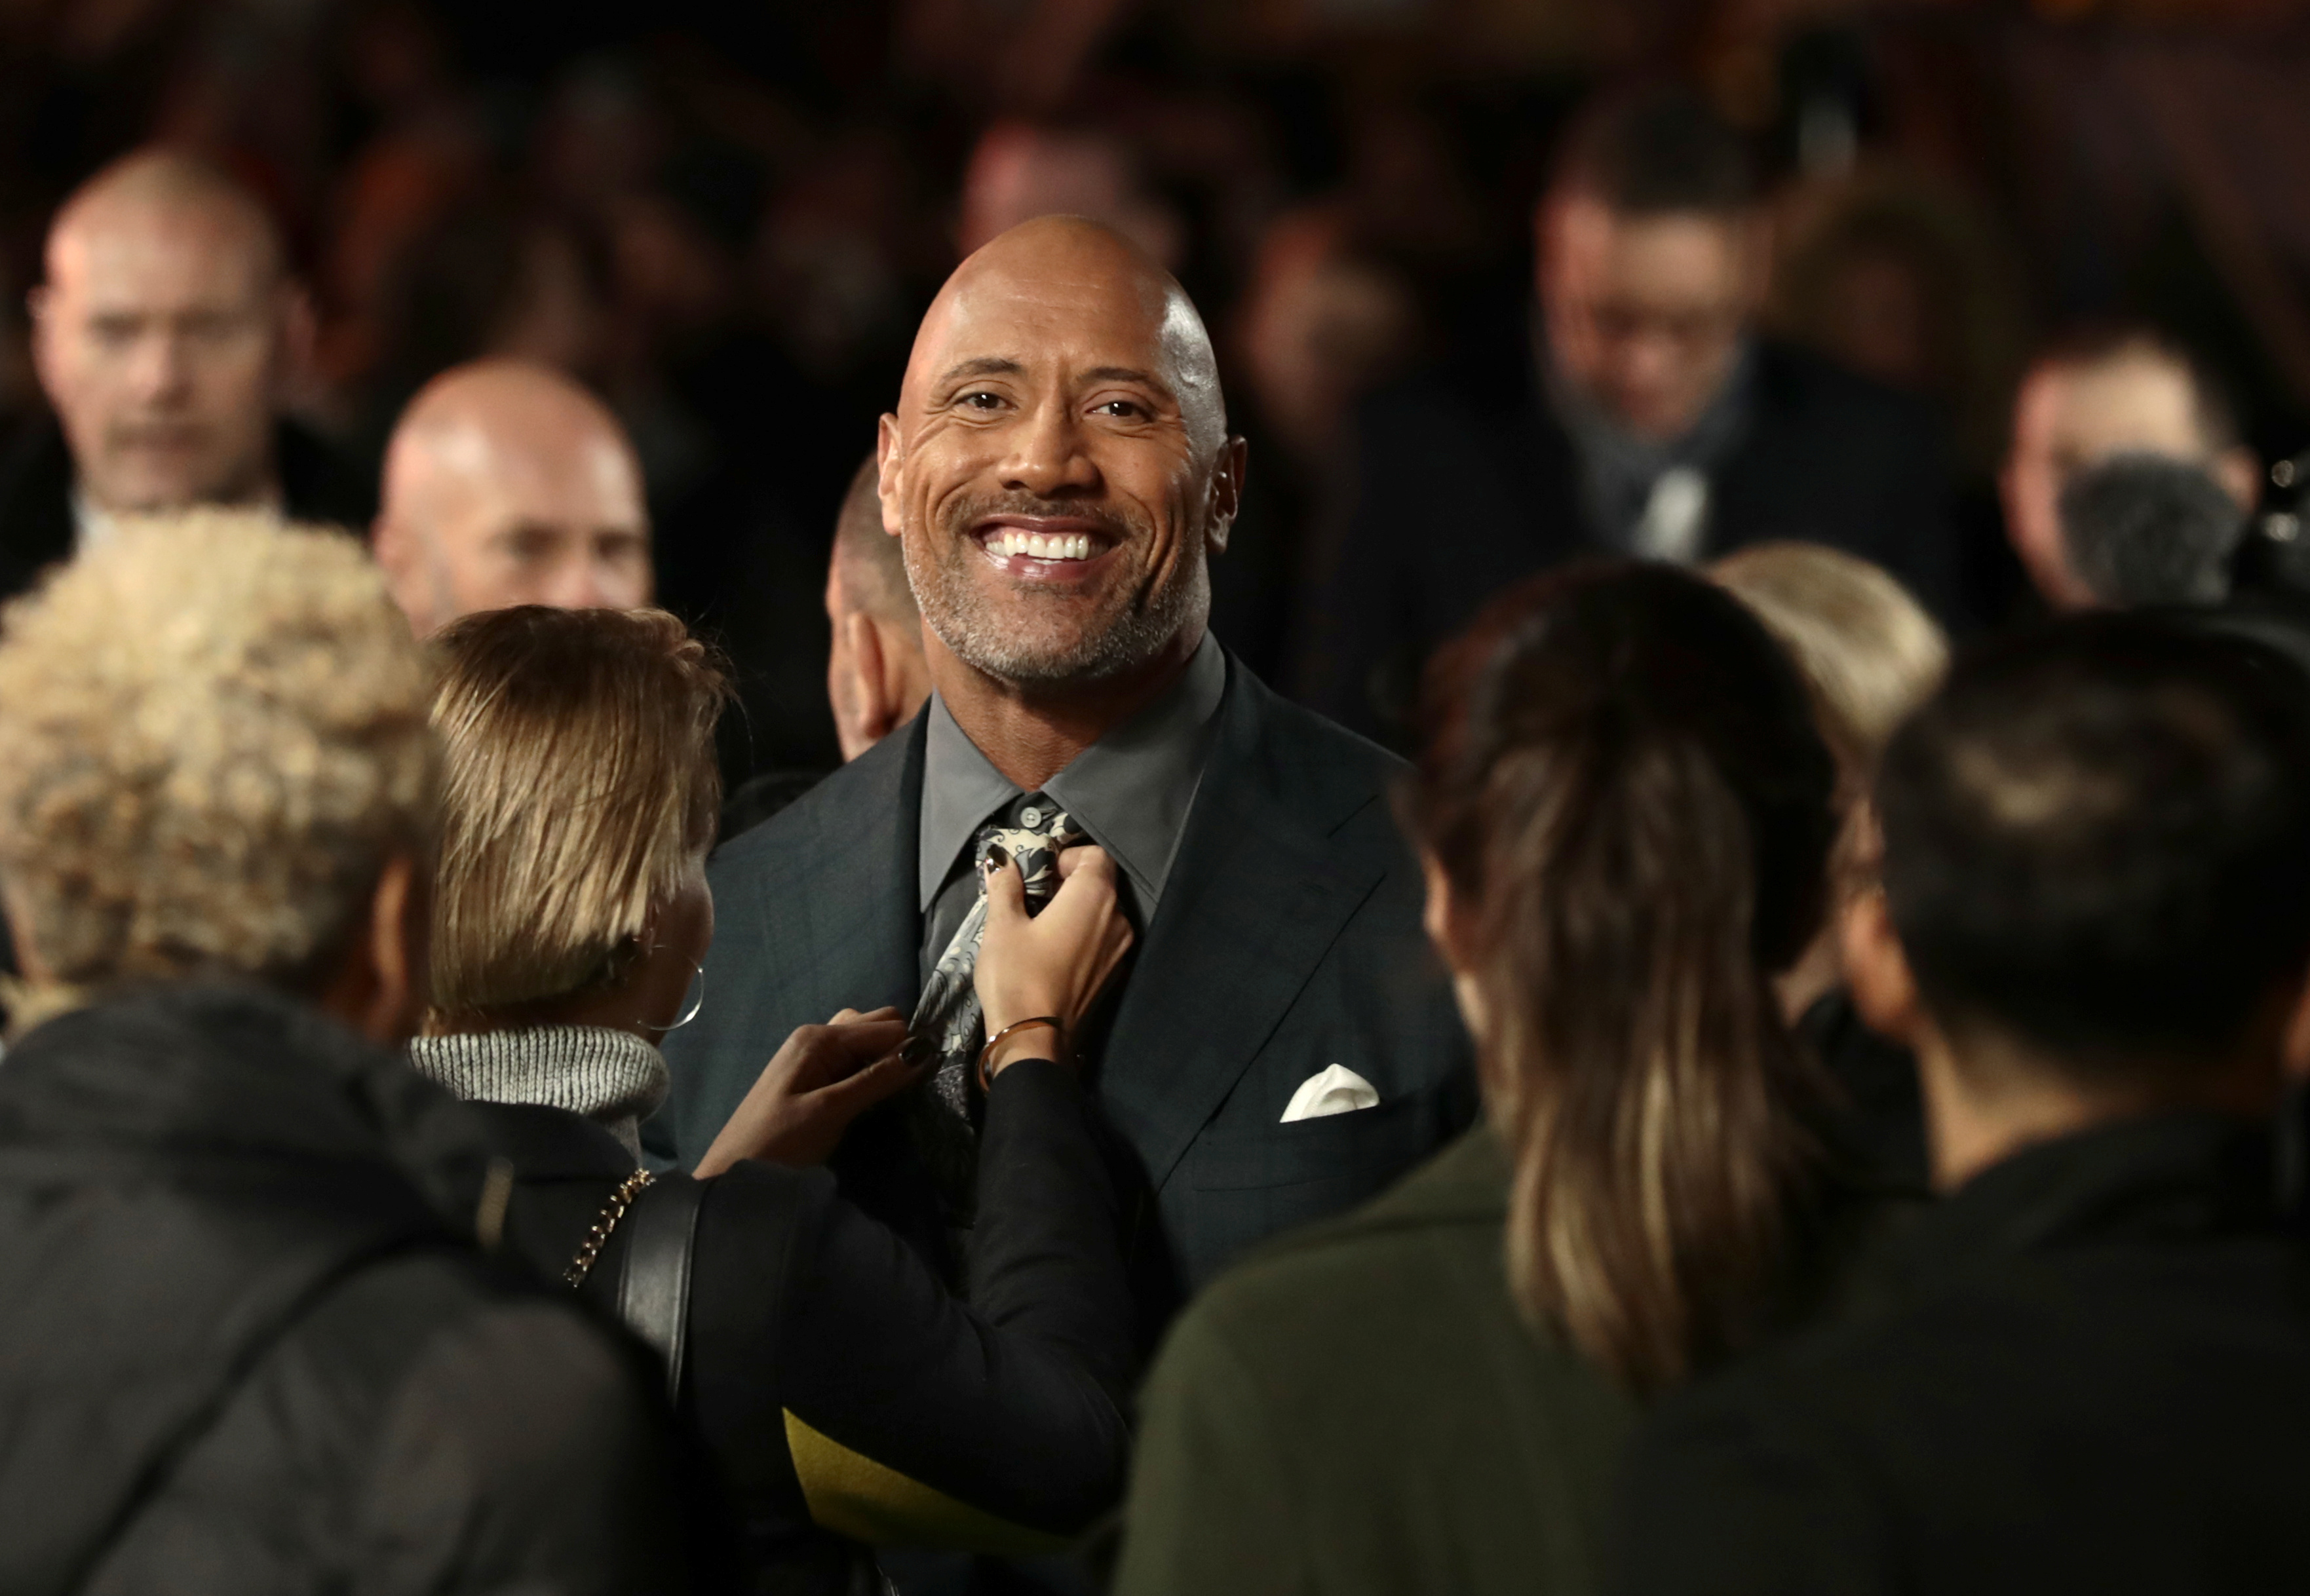 Actor Dwayne Johnson prepares to pose for photographers as he arrives for the UK premiere of 'Jumanji: Welcome to the Jungle', at the Vue West End, Leicester Square, central London, Britain December 7, 2017. REUTERS/Simon Dawson 